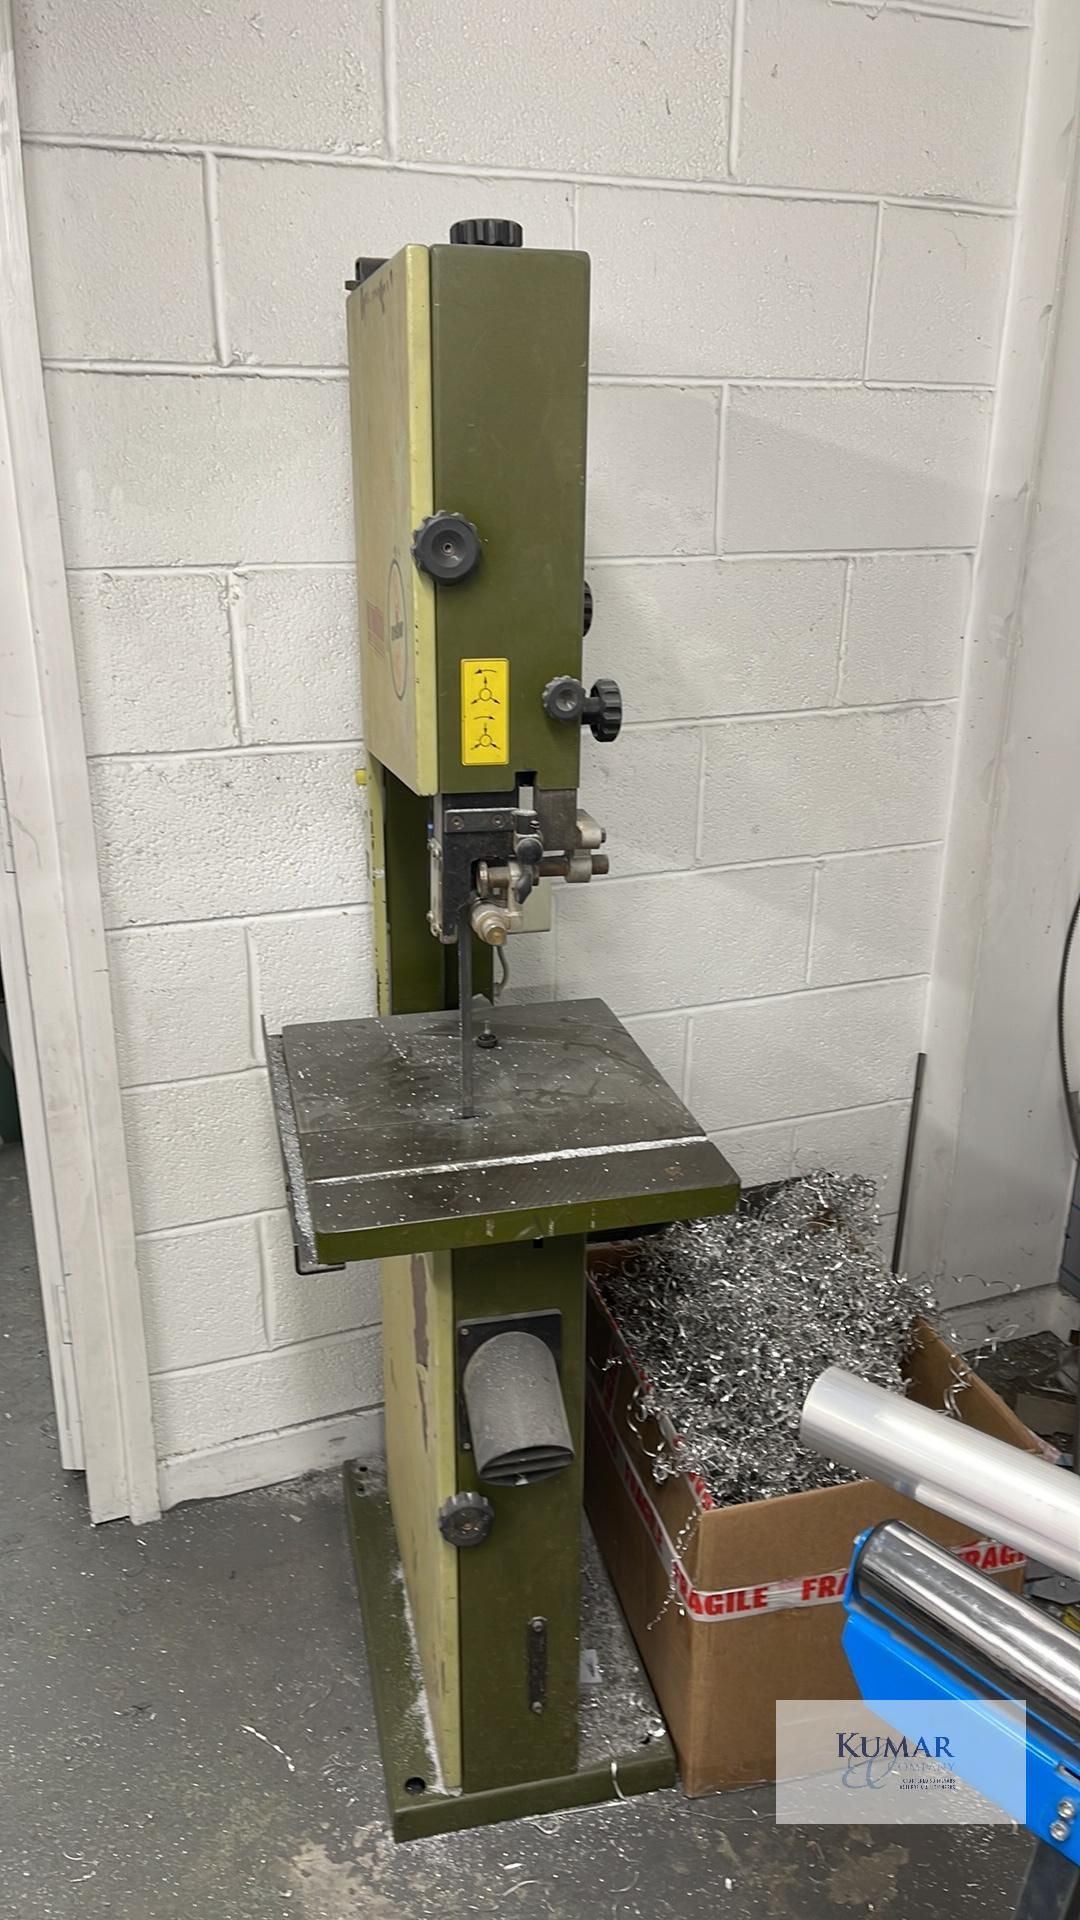 Meber P400 Bandsaw - (Spares or Repair) Understand Saw Starts and Works Then Cuts Out - Image 4 of 4